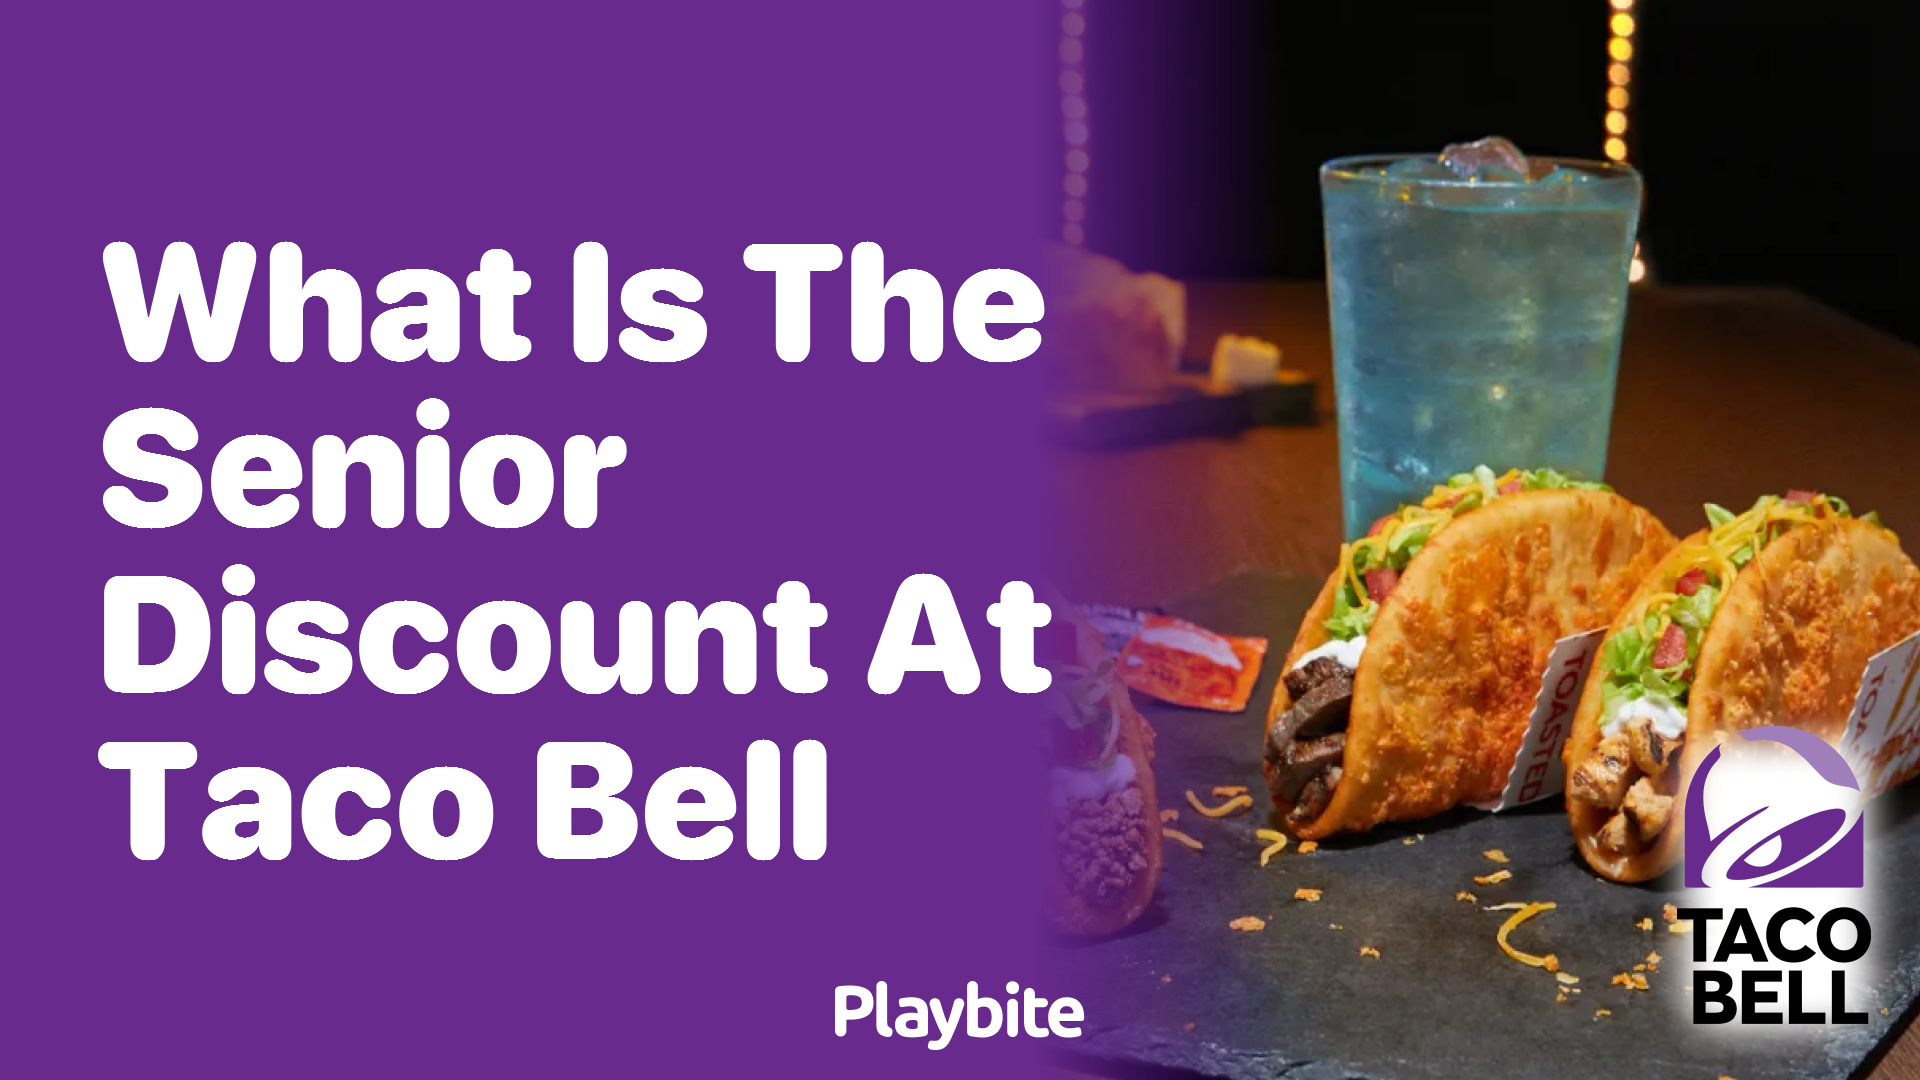 What is the Senior Discount at Taco Bell?